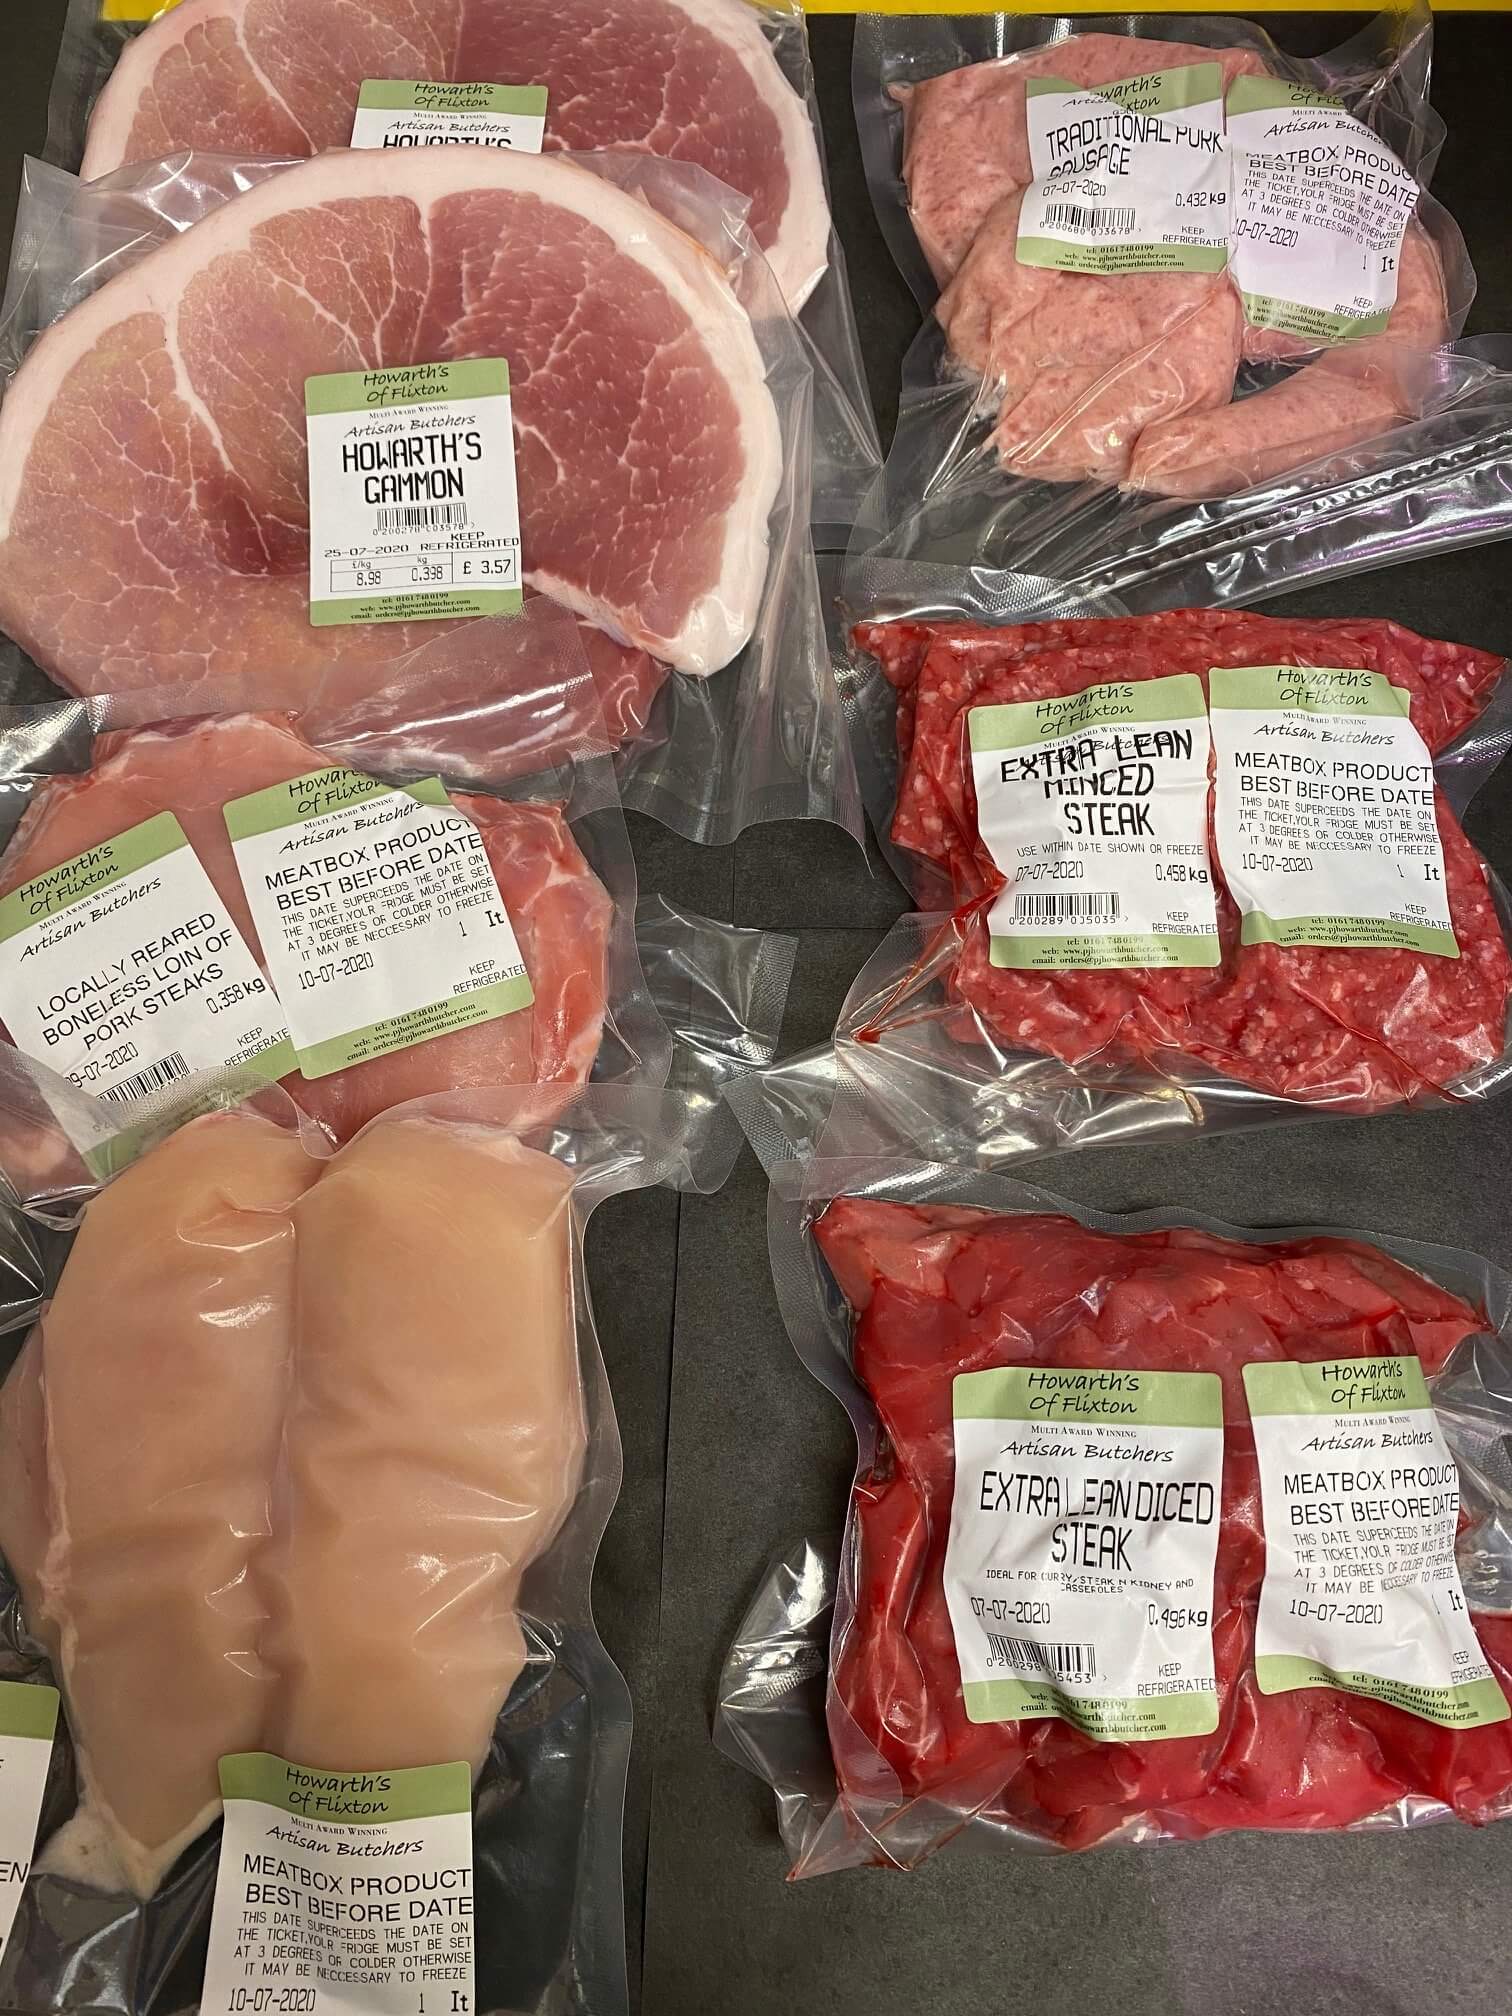 The 6 Day Meat Box Selection